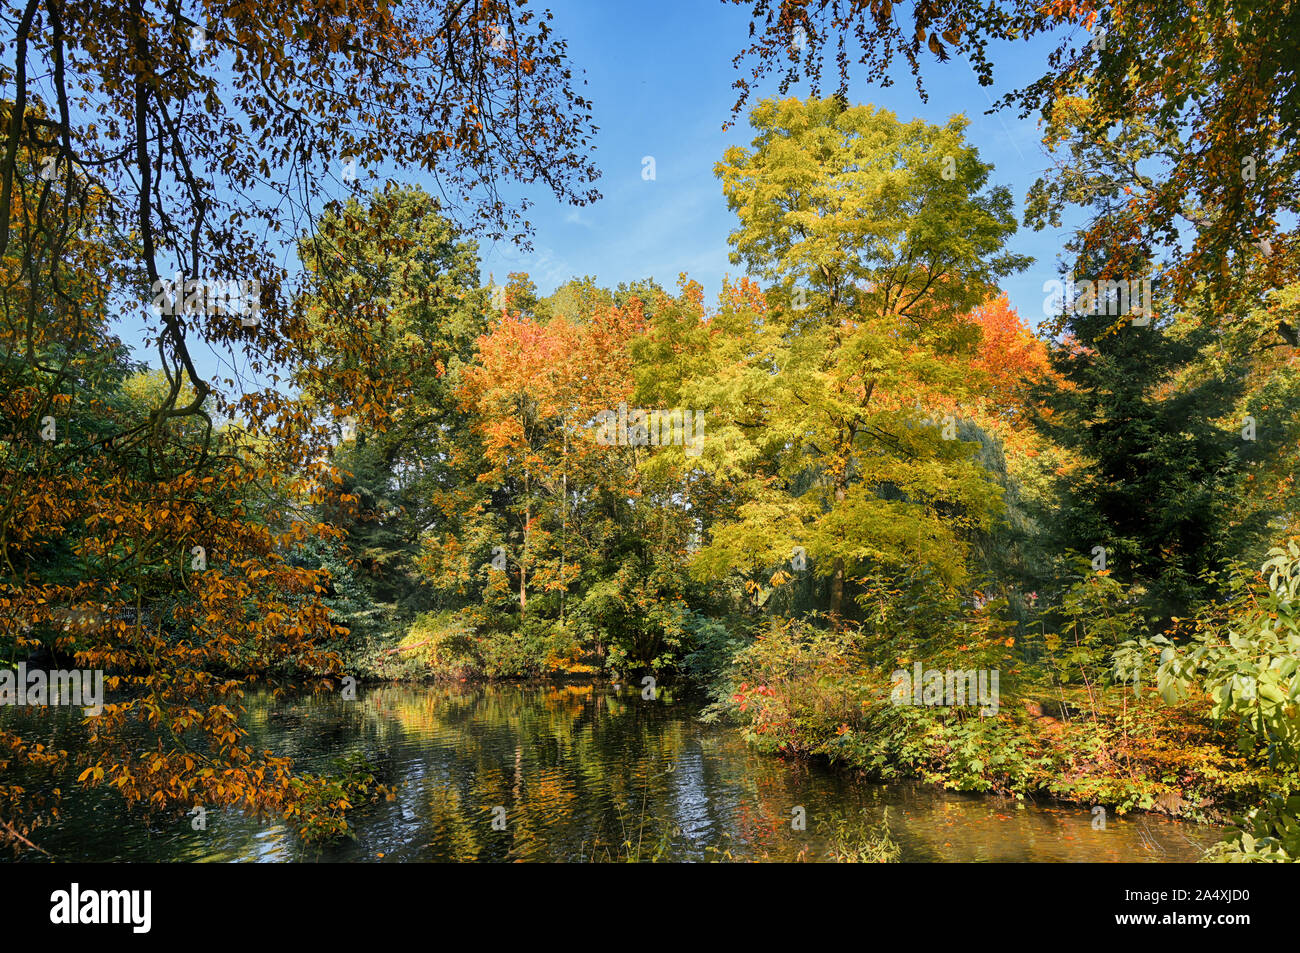 beautiful autumn trees with colorful leaves on a lake in an old park, seasonal nature background with blue sky Stock Photo